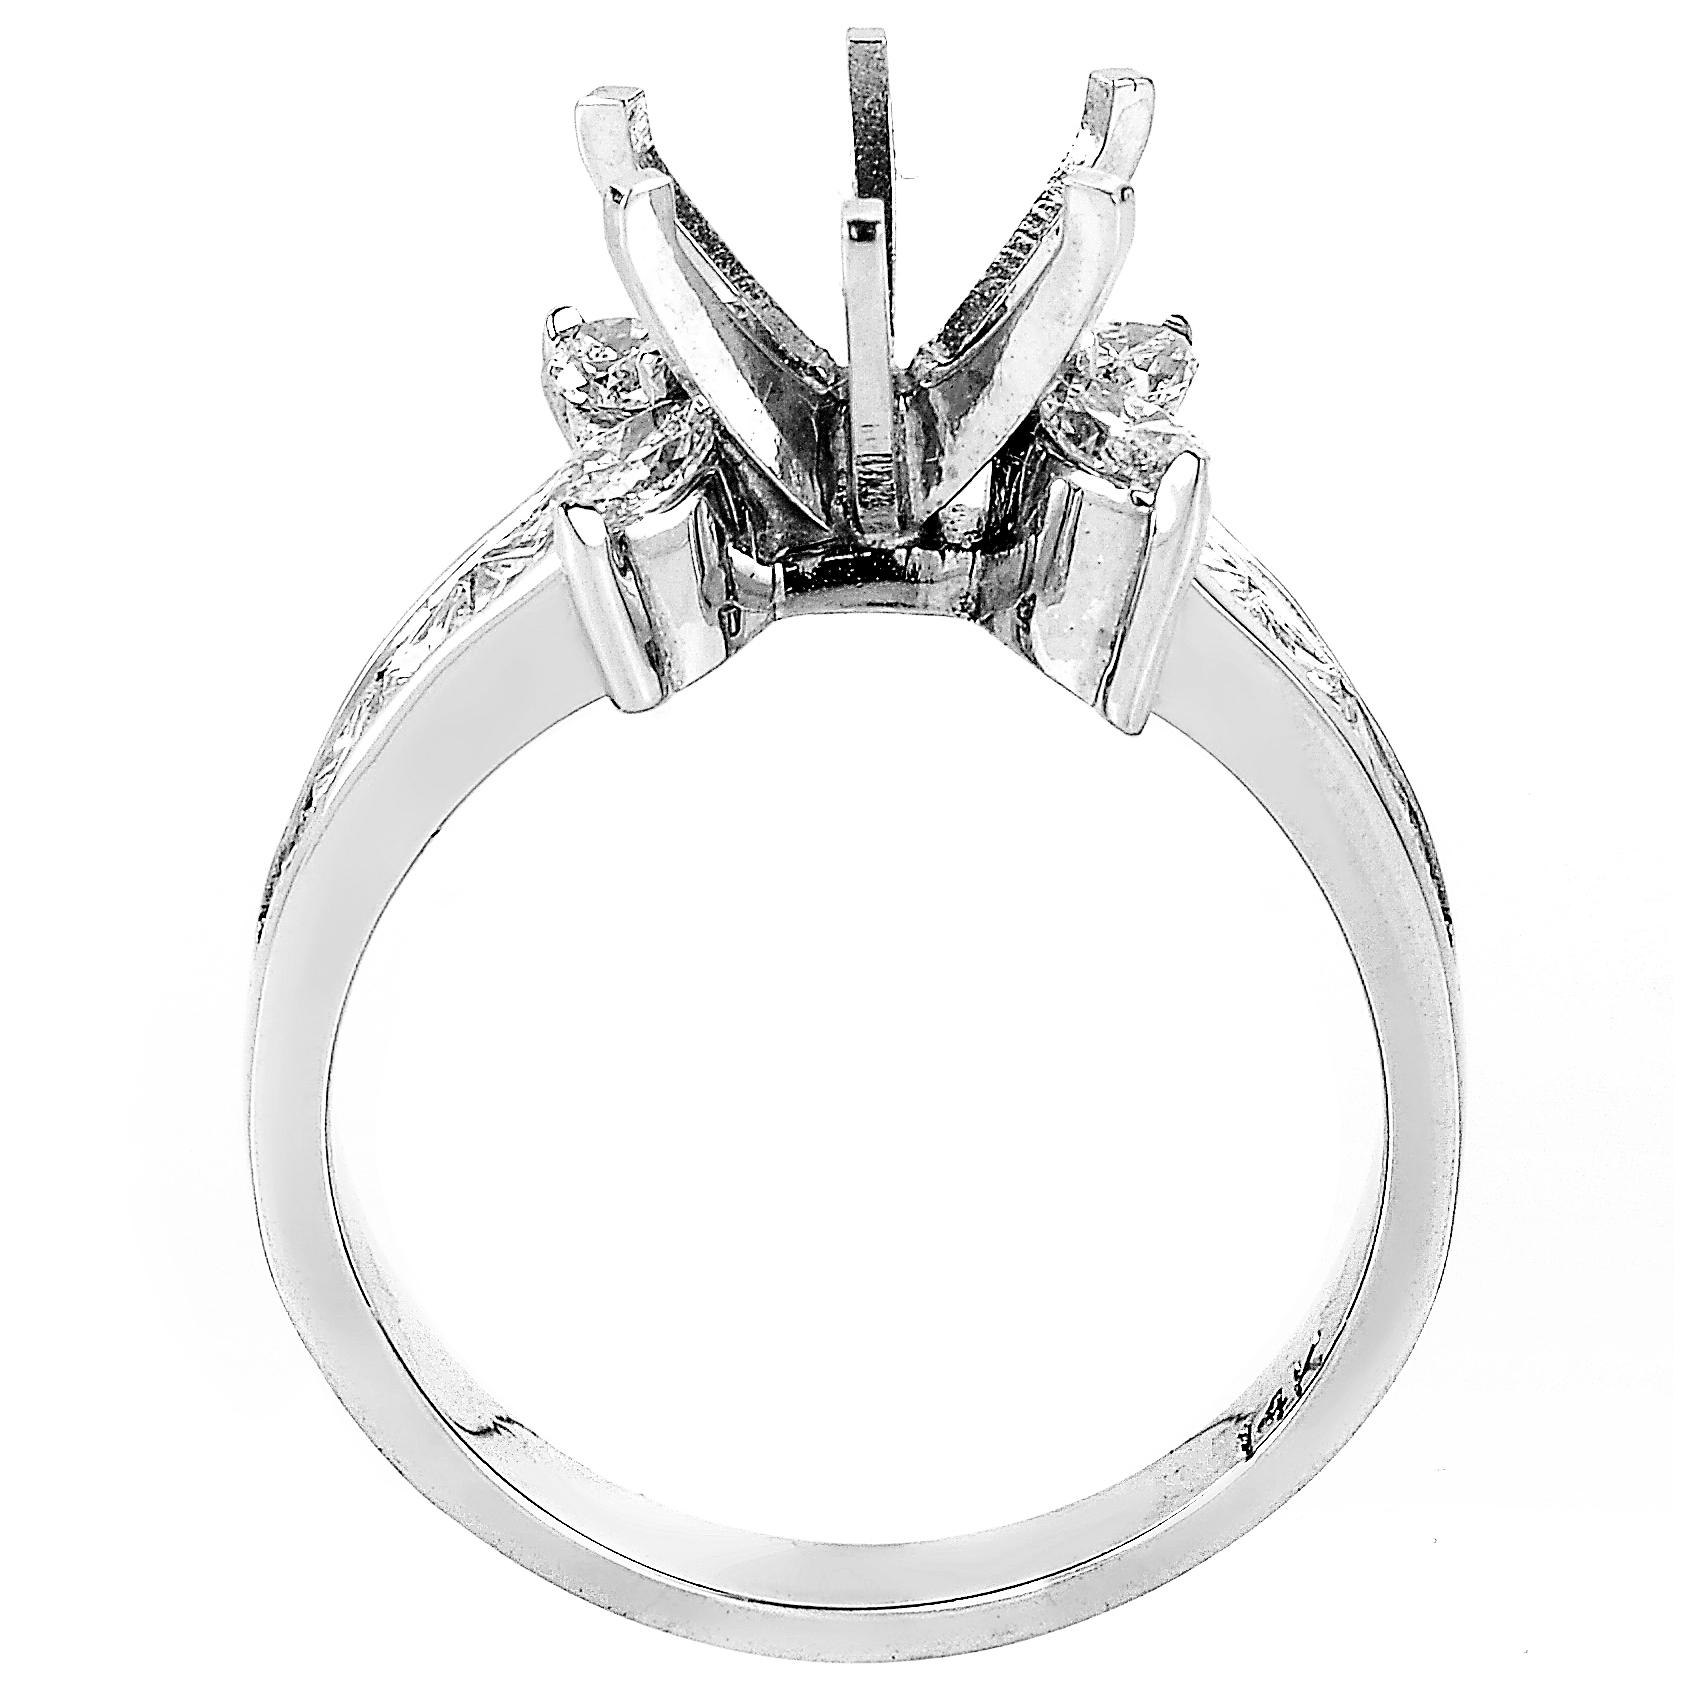 This mounting ring from Natalie K is feminine and flirty. It is made of 18K white gold and boasts diamond sidestones and diamond set shanks. The total diamond carat weight is ~1.05ct of diamonds.
